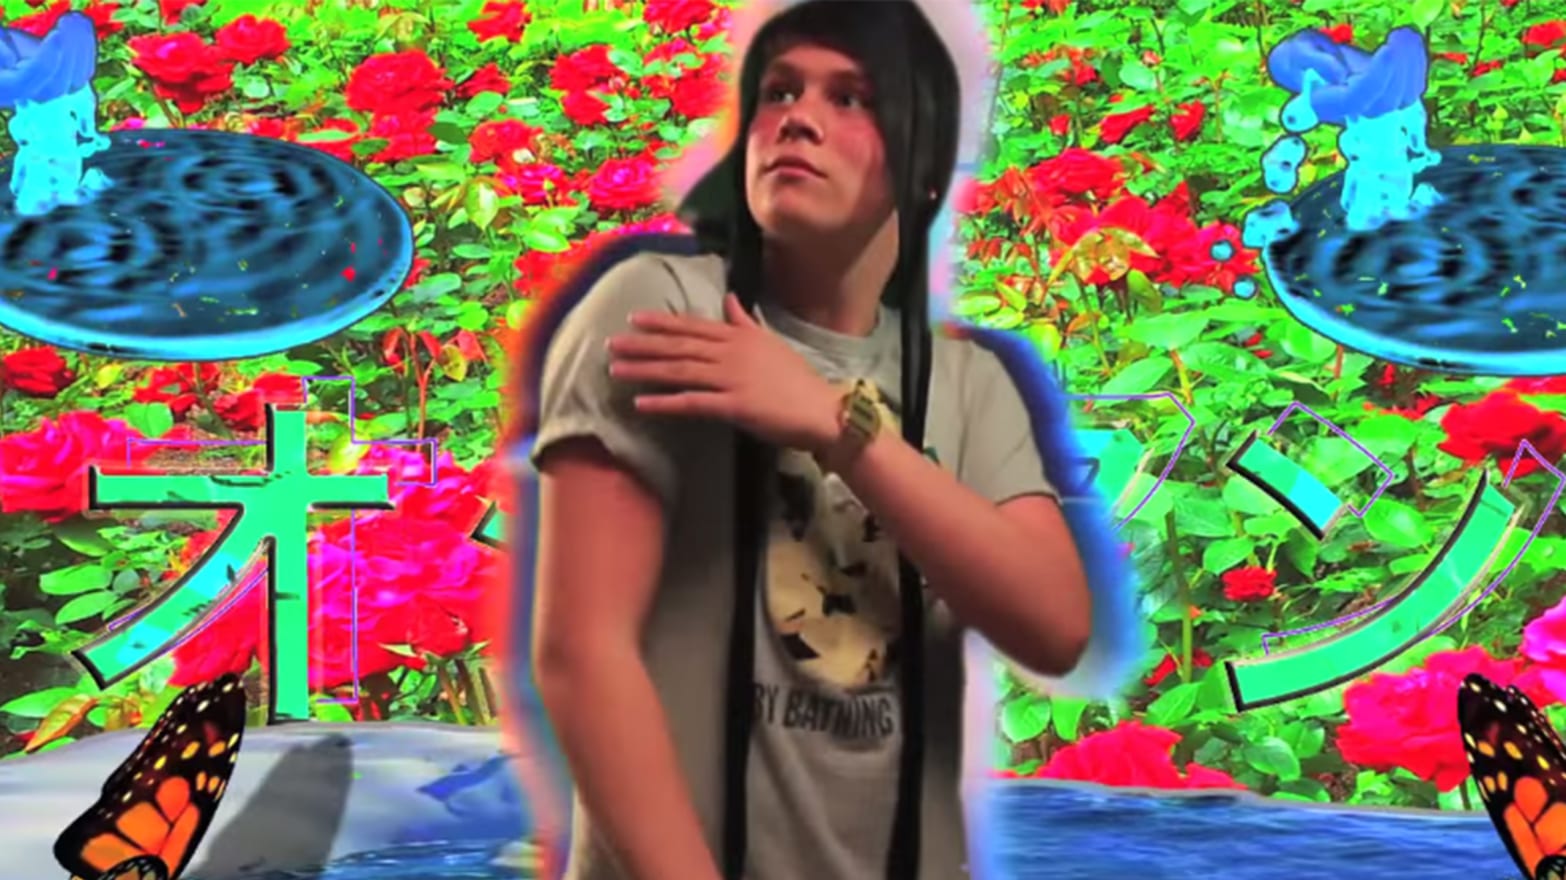 The Cult Of Yung Lean ‘im Building An Anarchistic Society From The